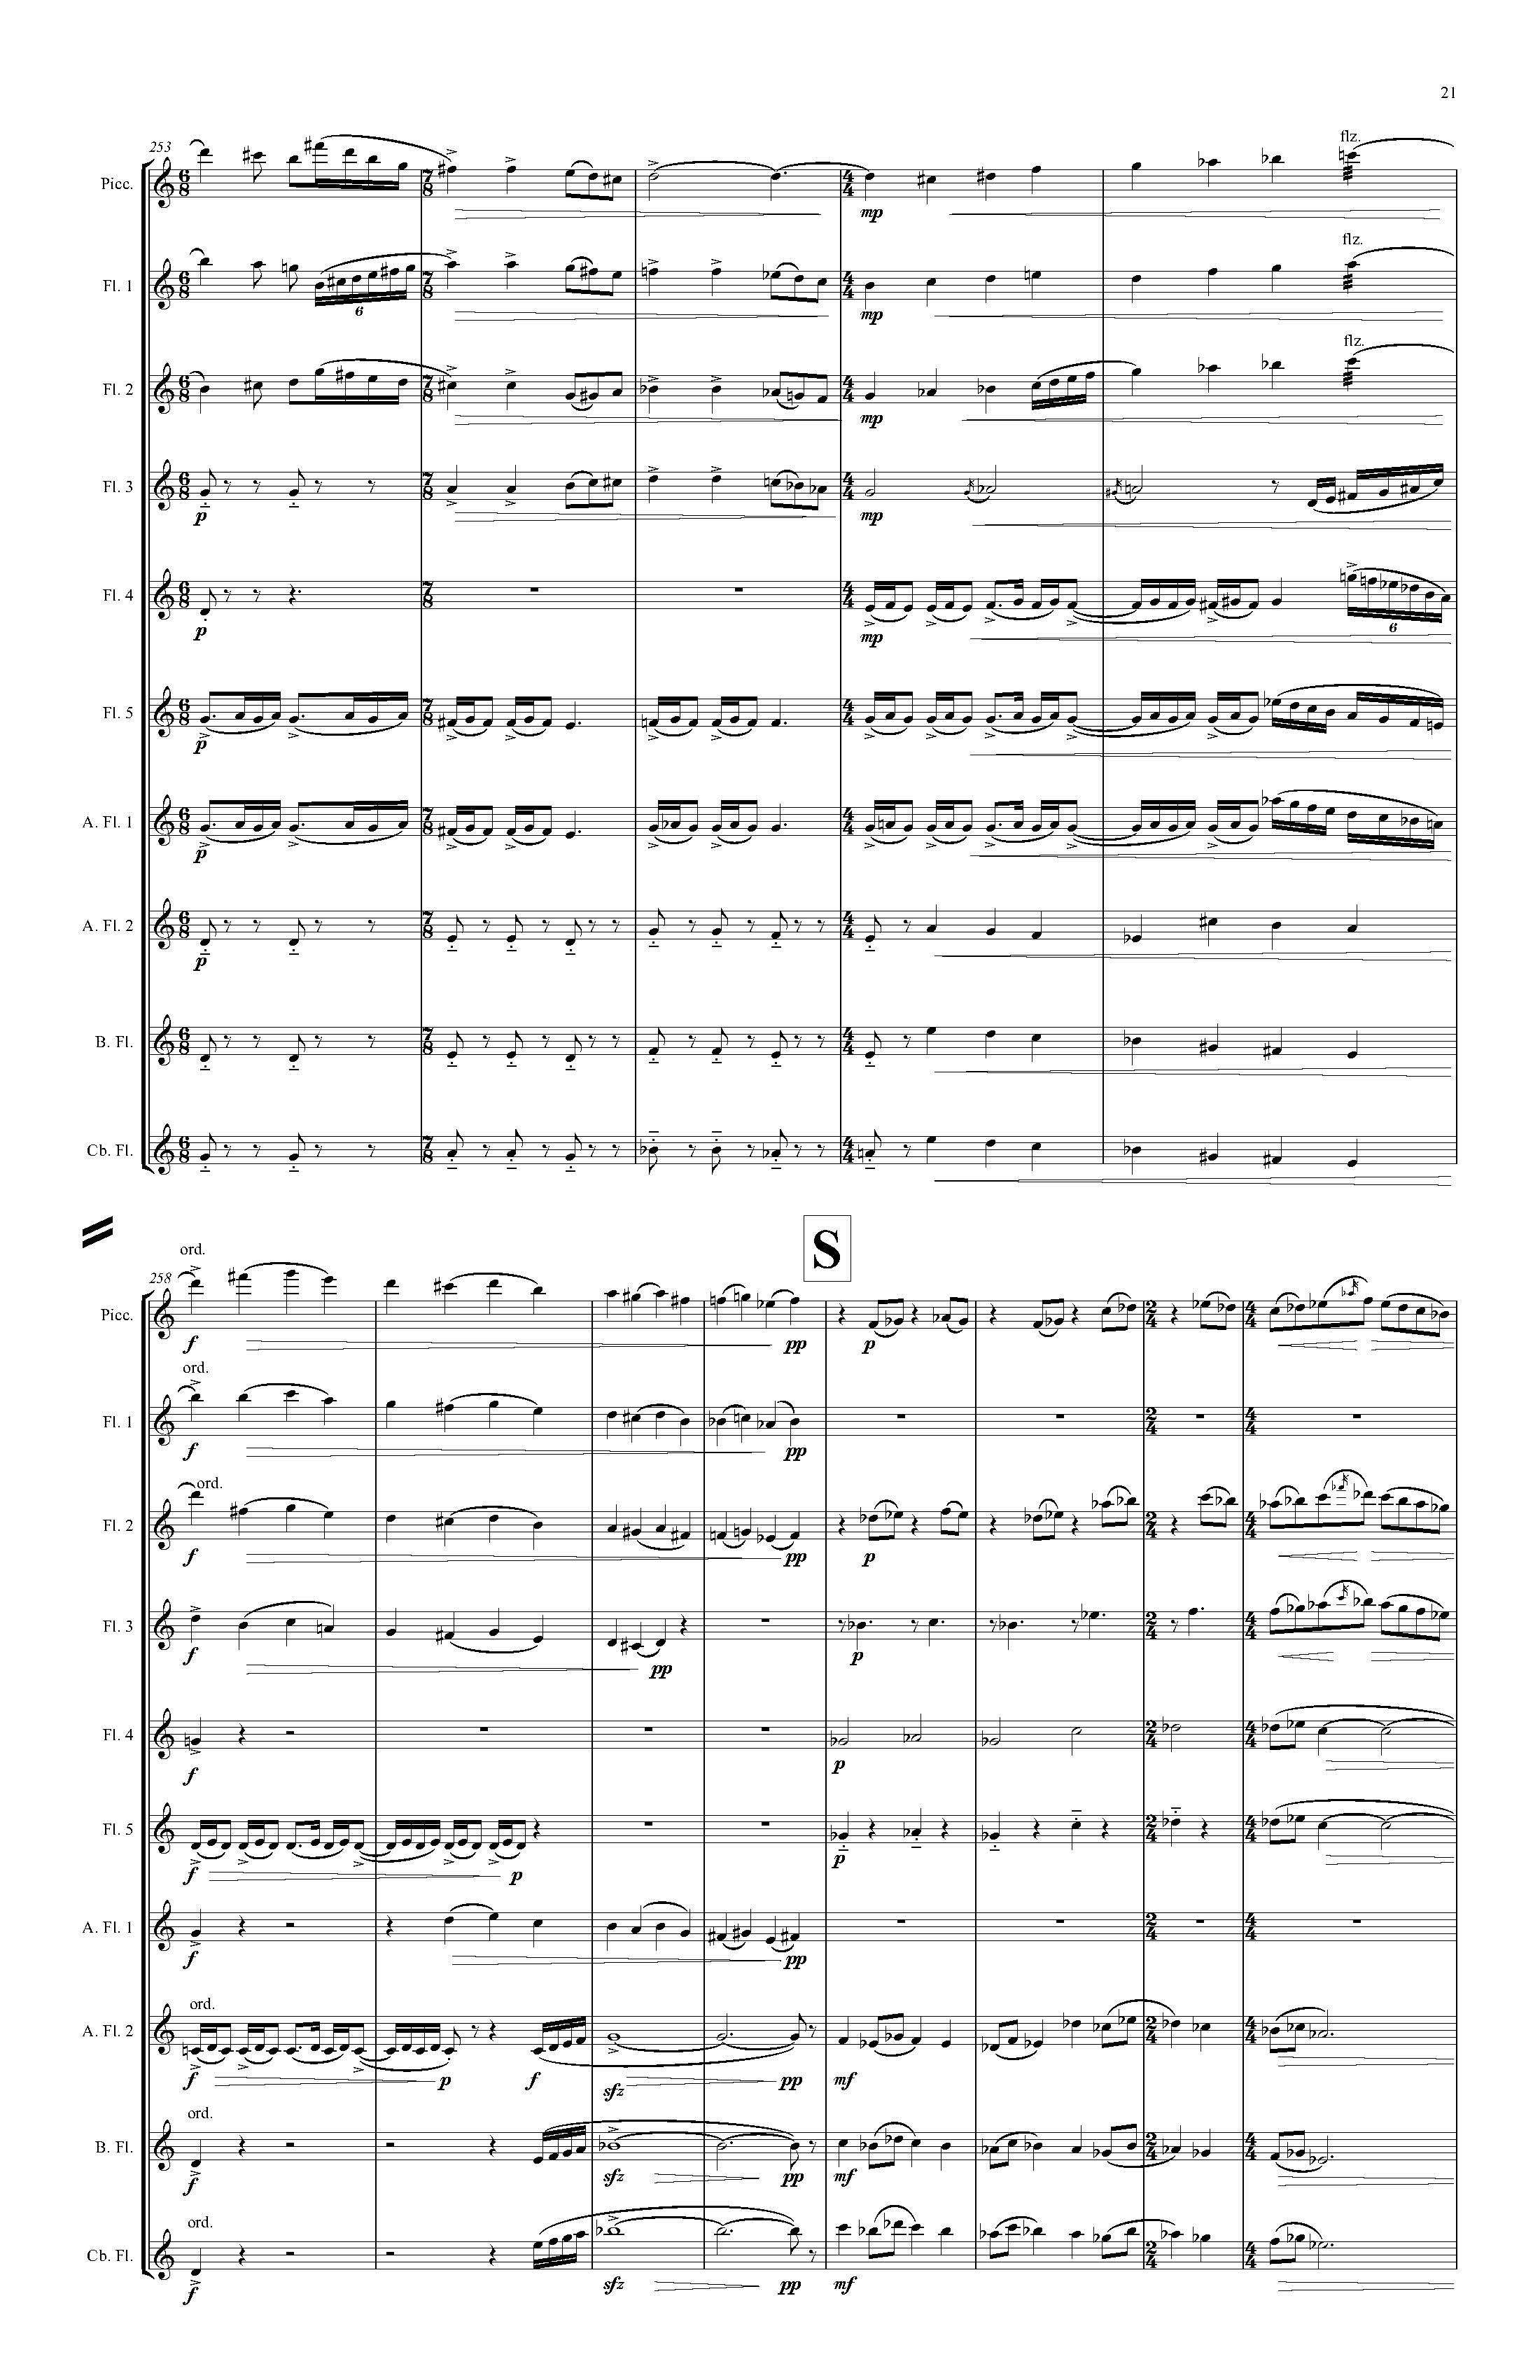 PIPES - Complete Score_Page_27.jpg